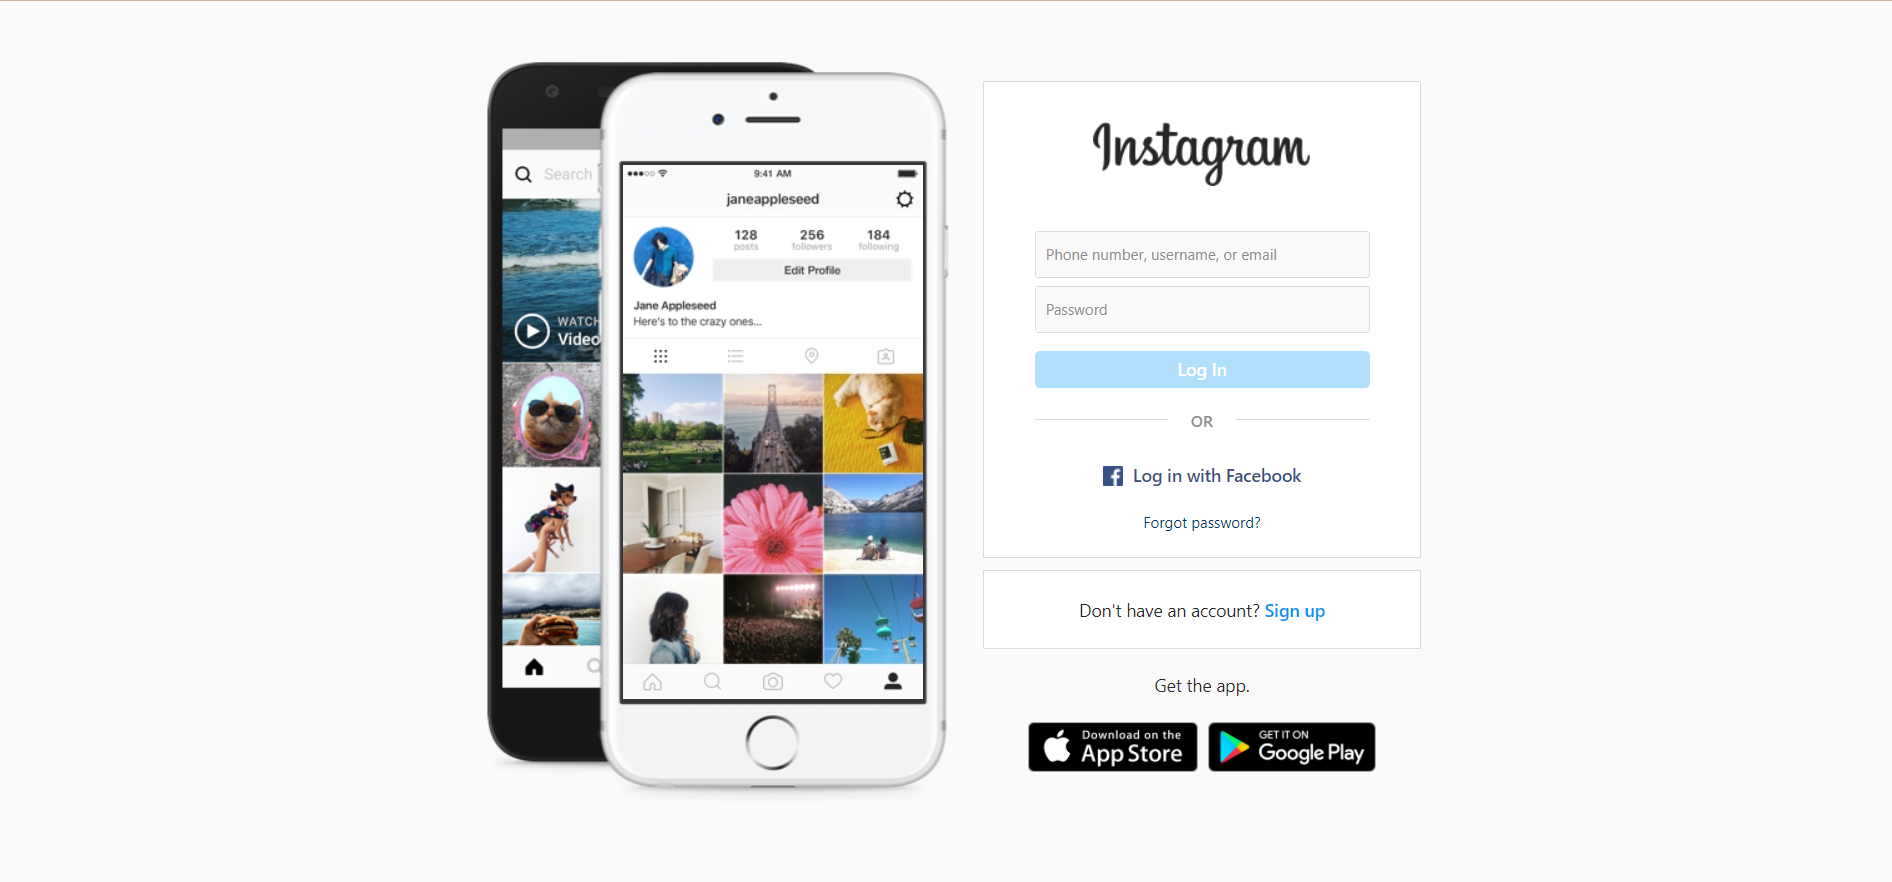 Log into your account to create carousel post on Instagram.